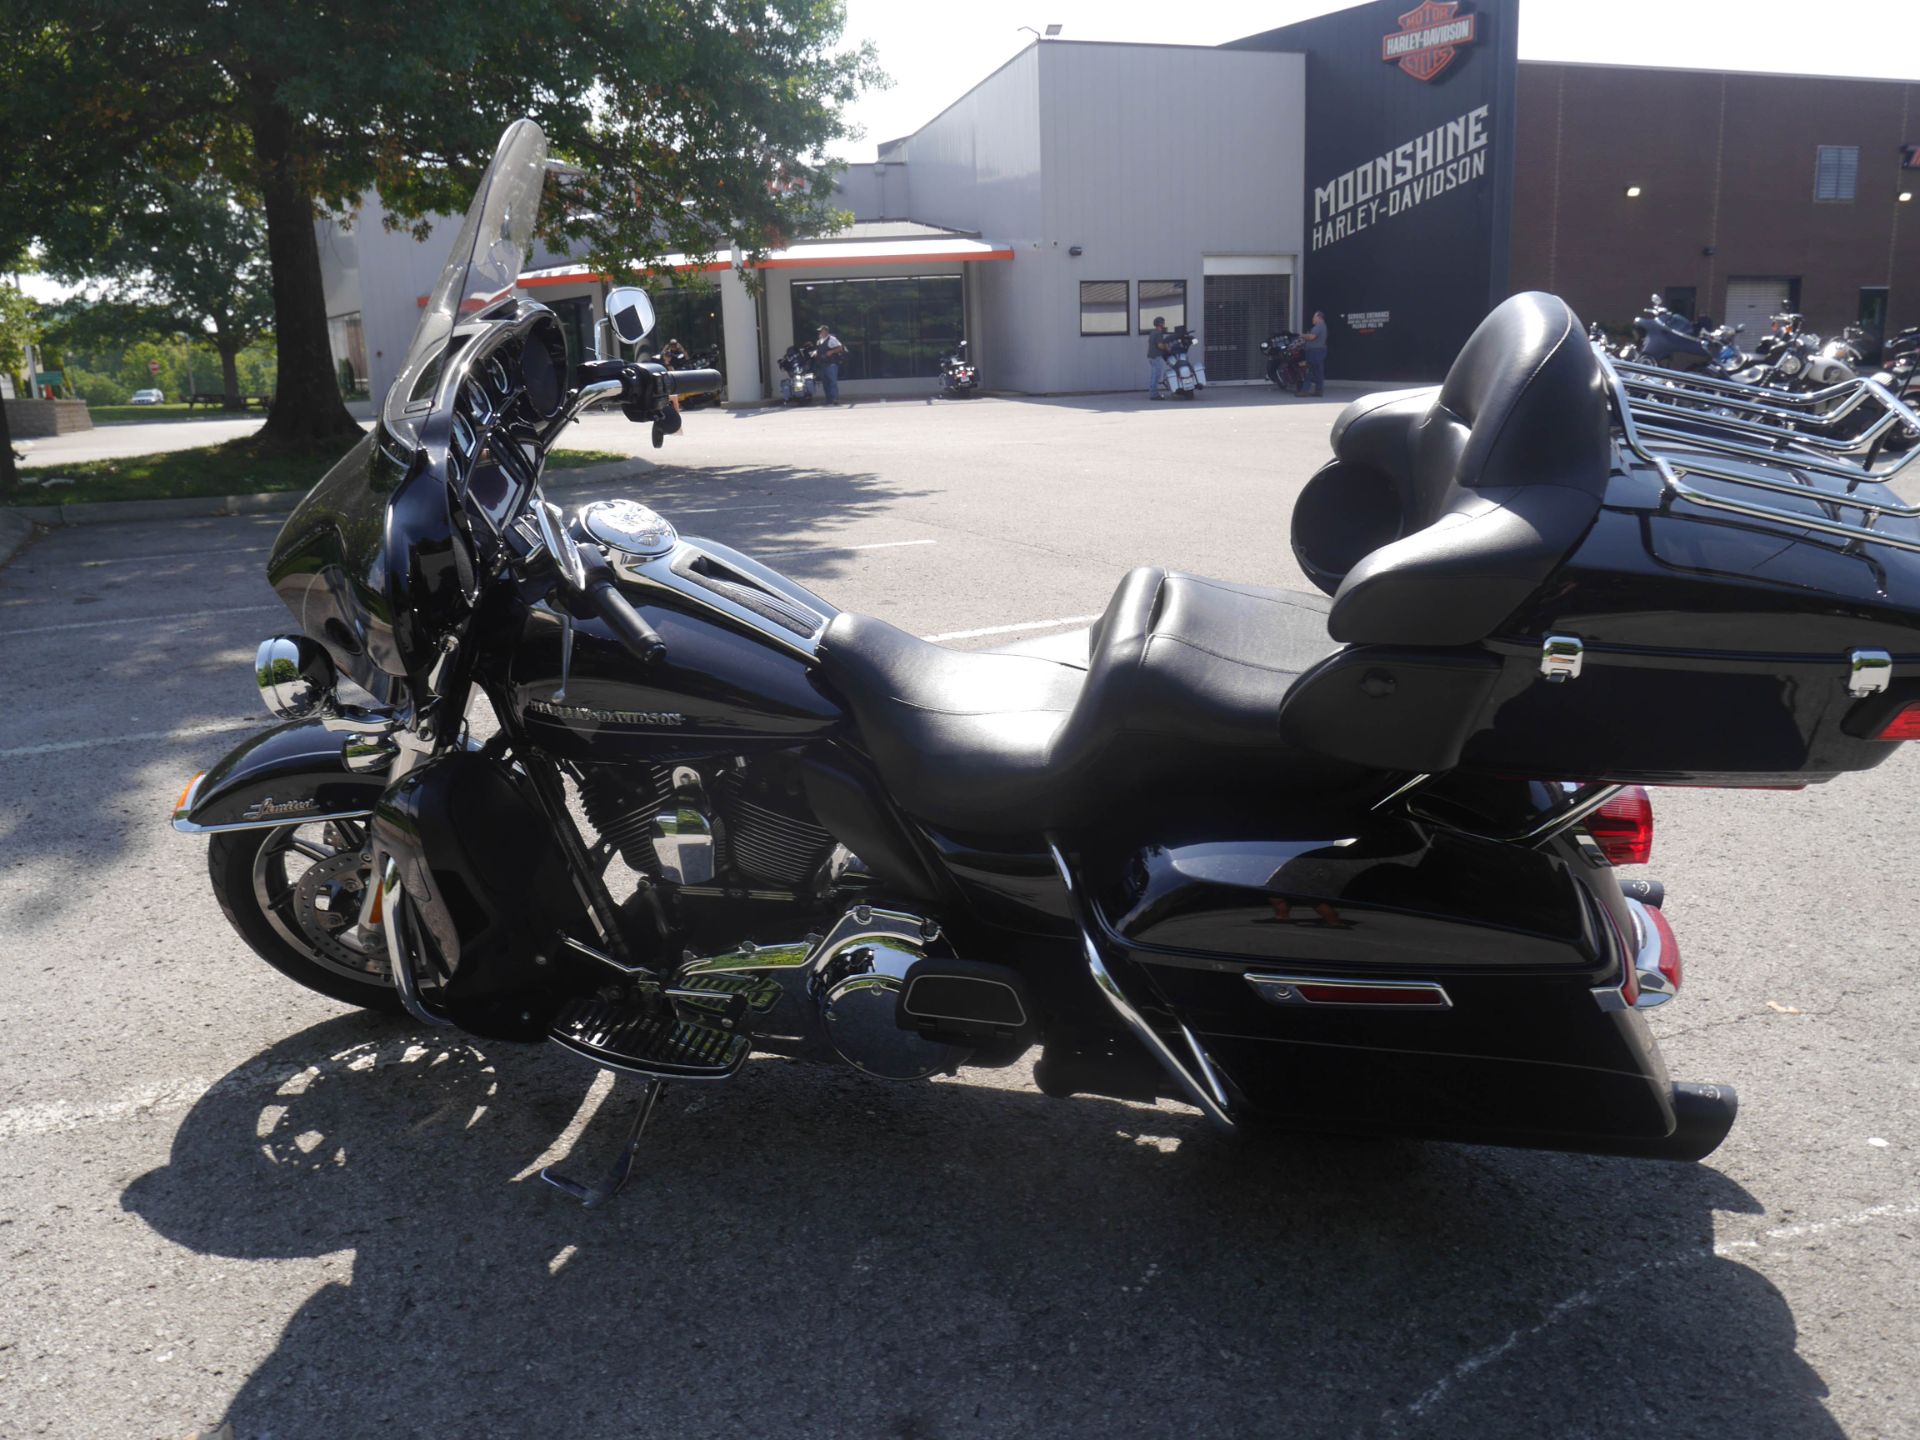 2015 Harley-Davidson Ultra Limited in Franklin, Tennessee - Photo 26